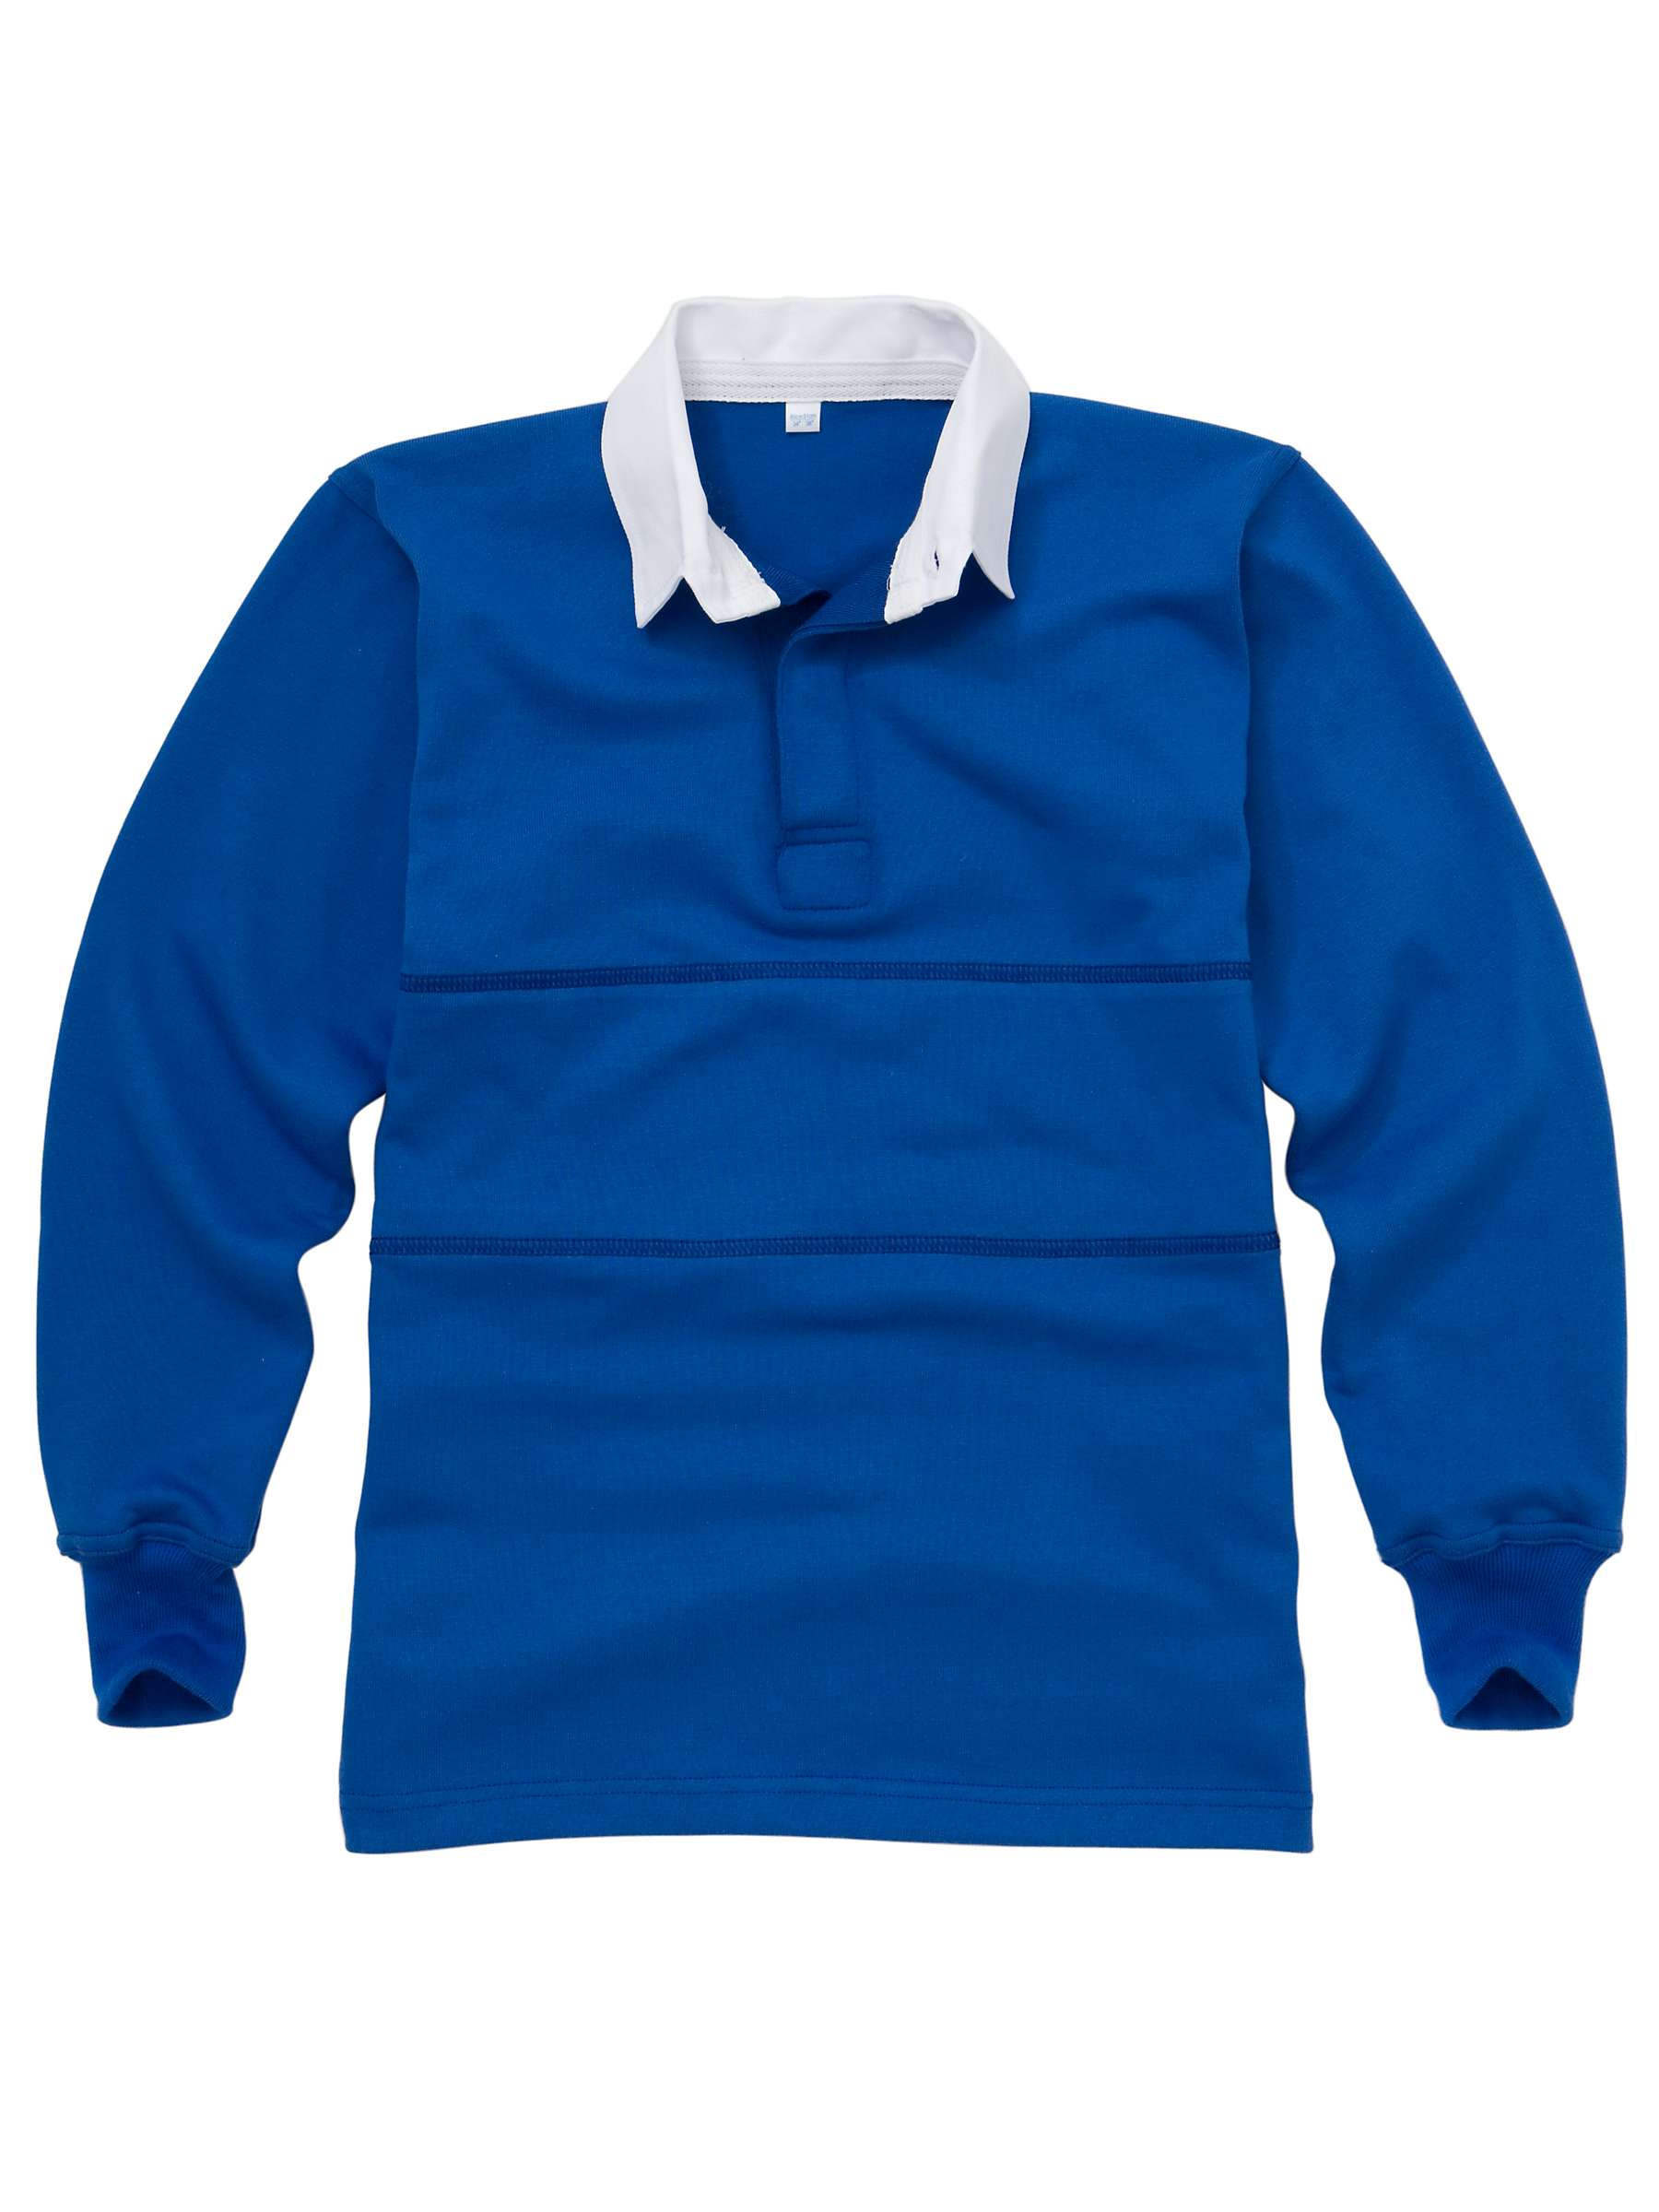 Buy School Sports Rugby Shirt Online at johnlewis.com